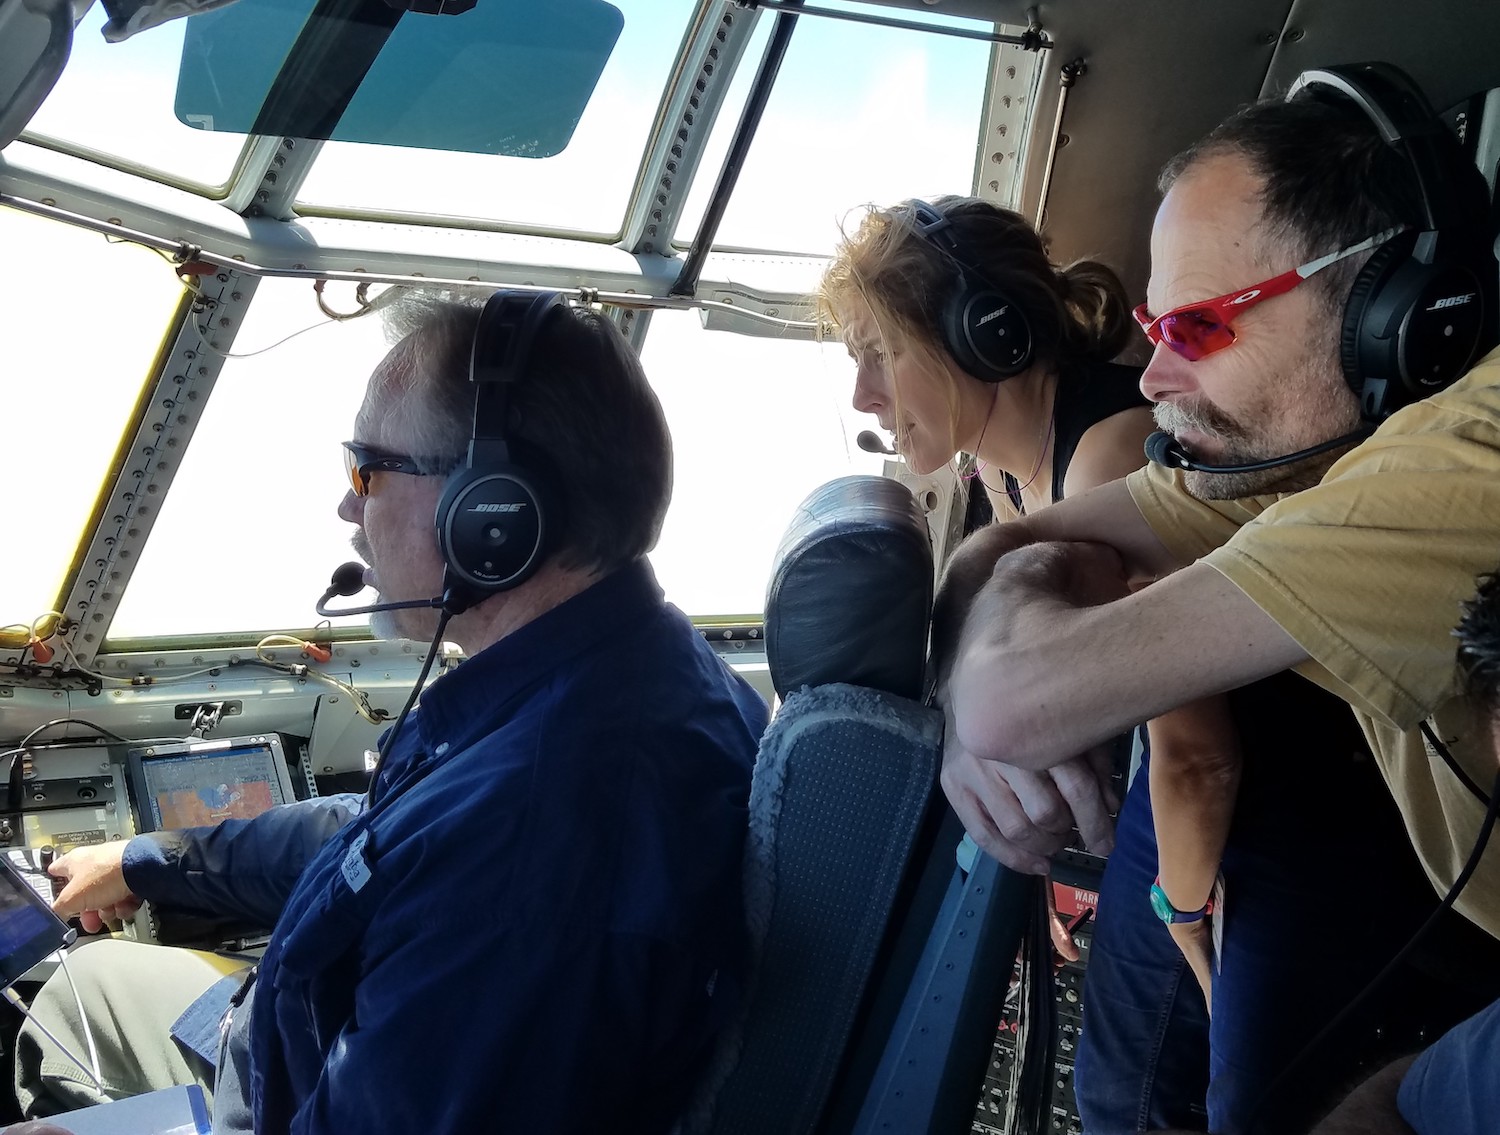 Scientists talking with the pilot in the cockpit of a research aircraft during a research mission to study wildfire smoke